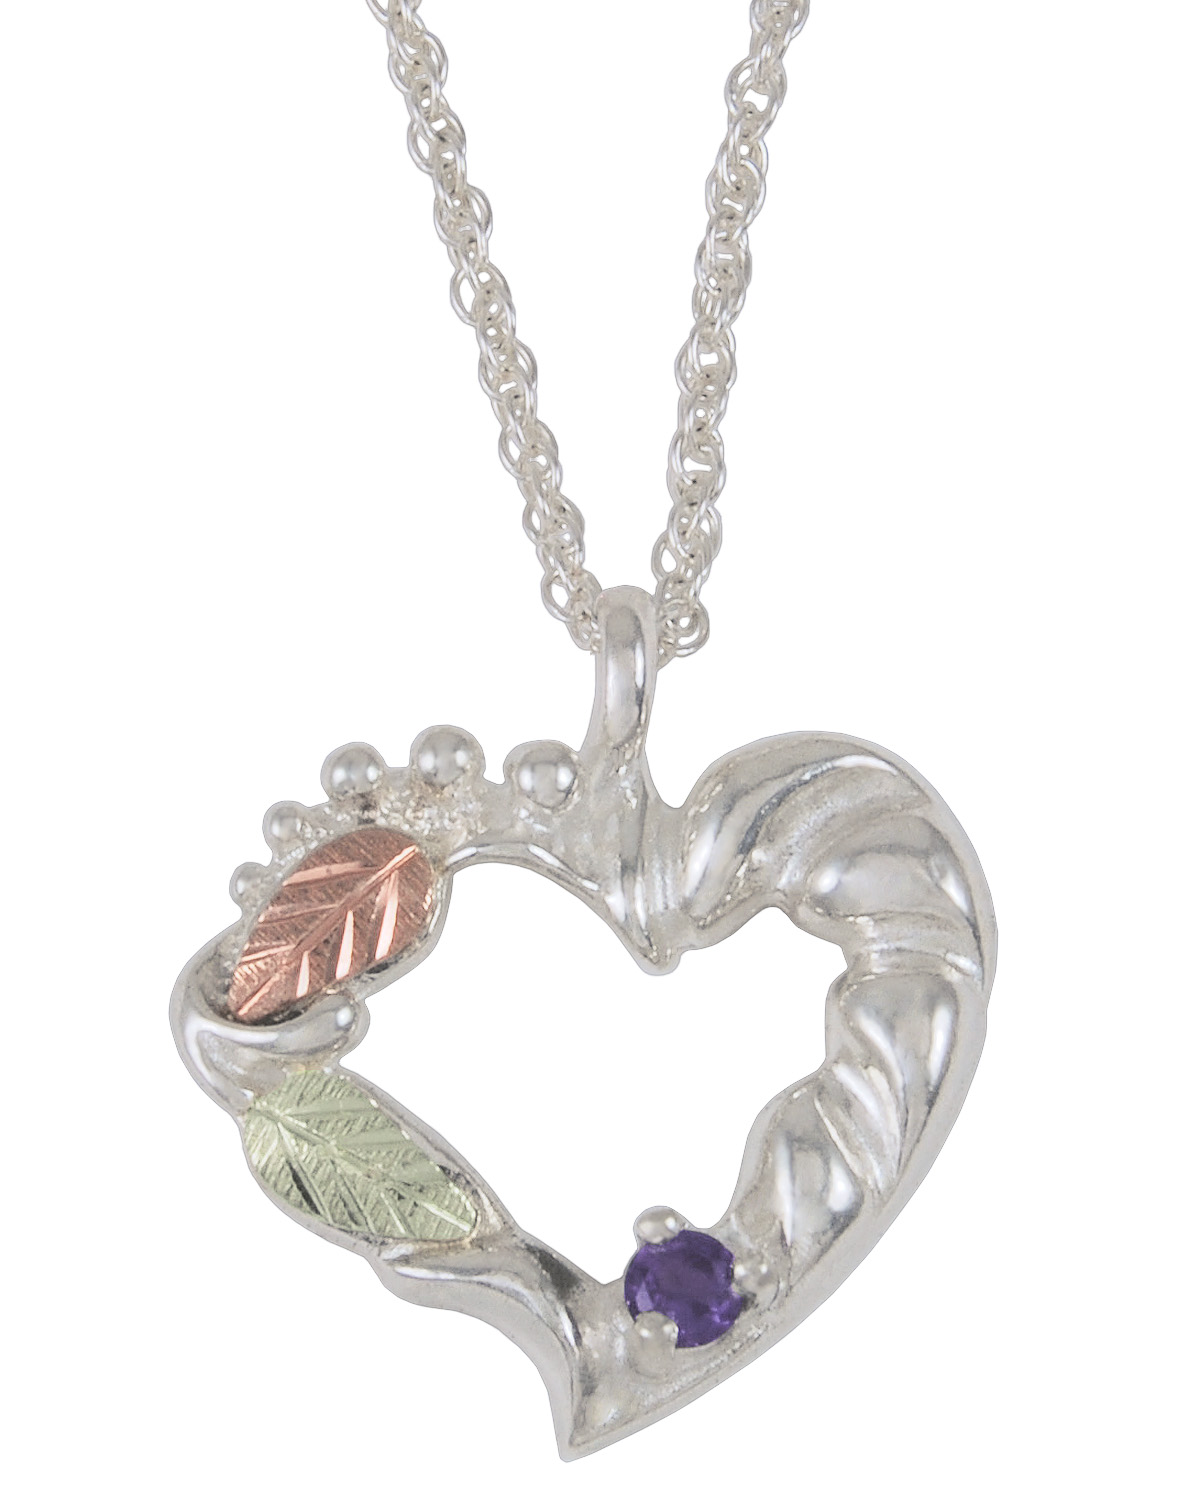 Amethyst Heart Pendant Necklace, Sterling Silver